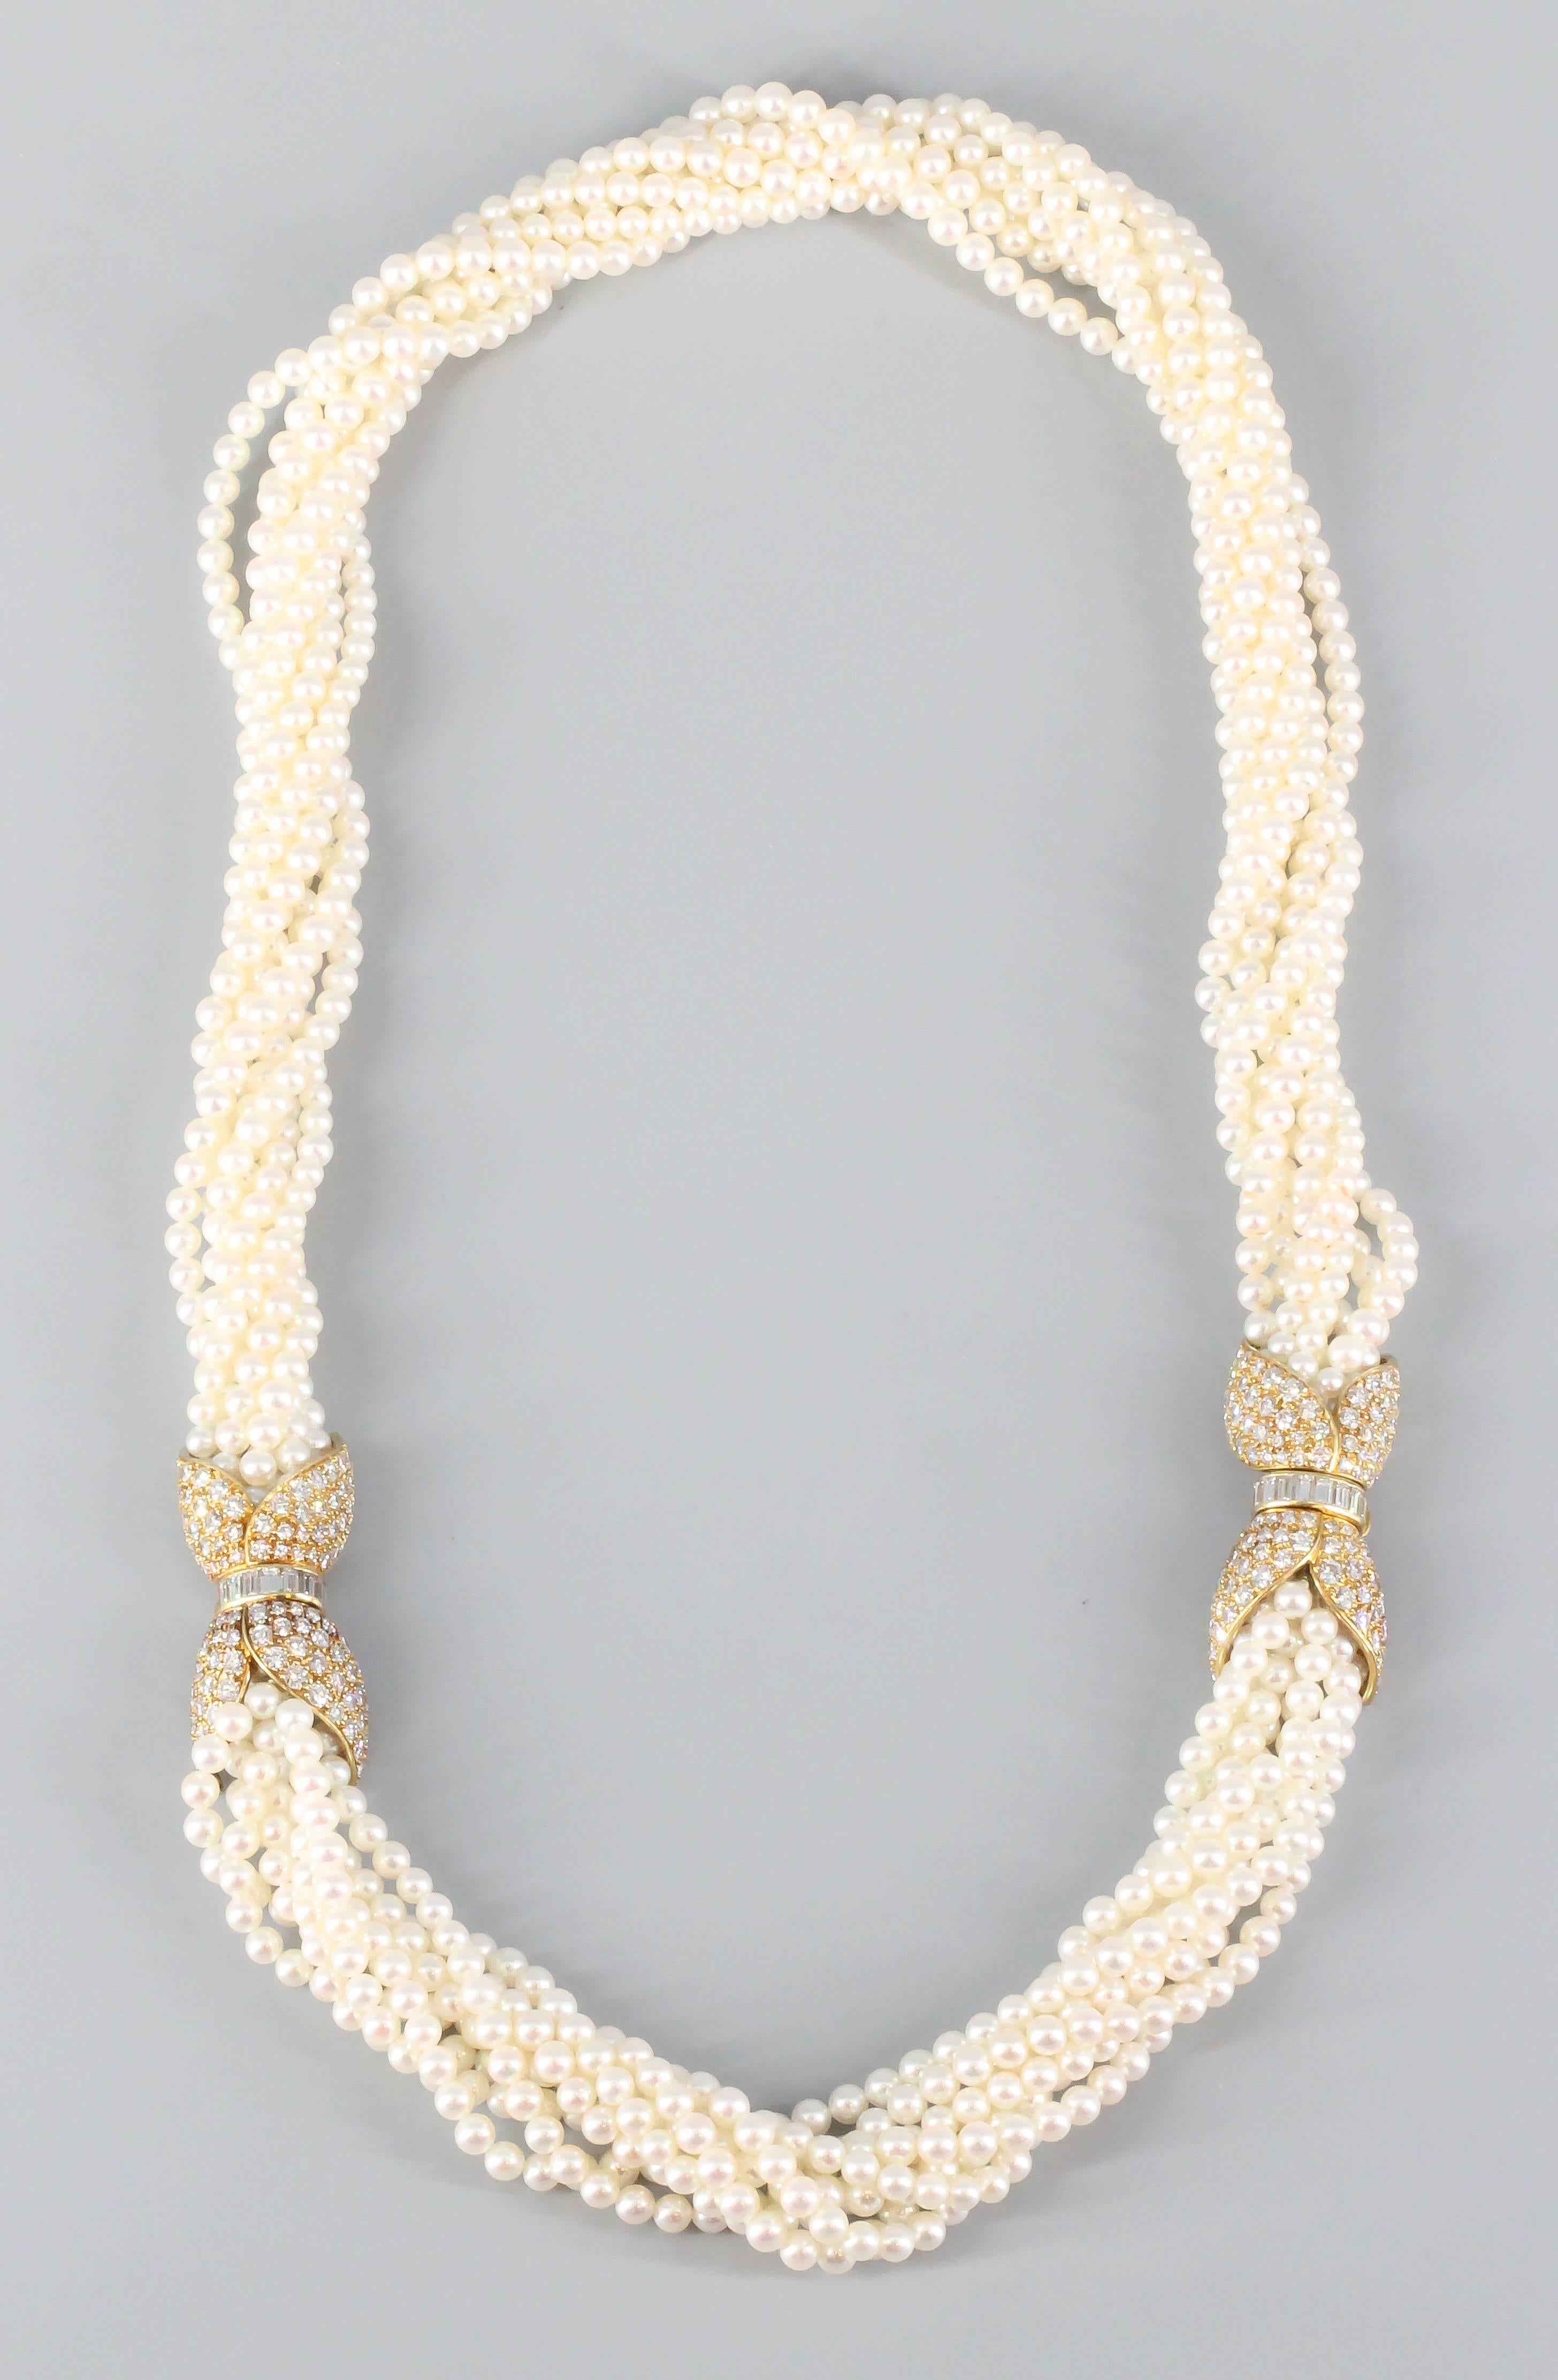 Chic diamond, 18K yellow gold and pearl torsade necklace and bracelet combination by Van Cleef & Arpels. It features 8 strands of lustrous pearls, held on by two clasps (each of which completes the necklace and the bracelet, or can be combined to